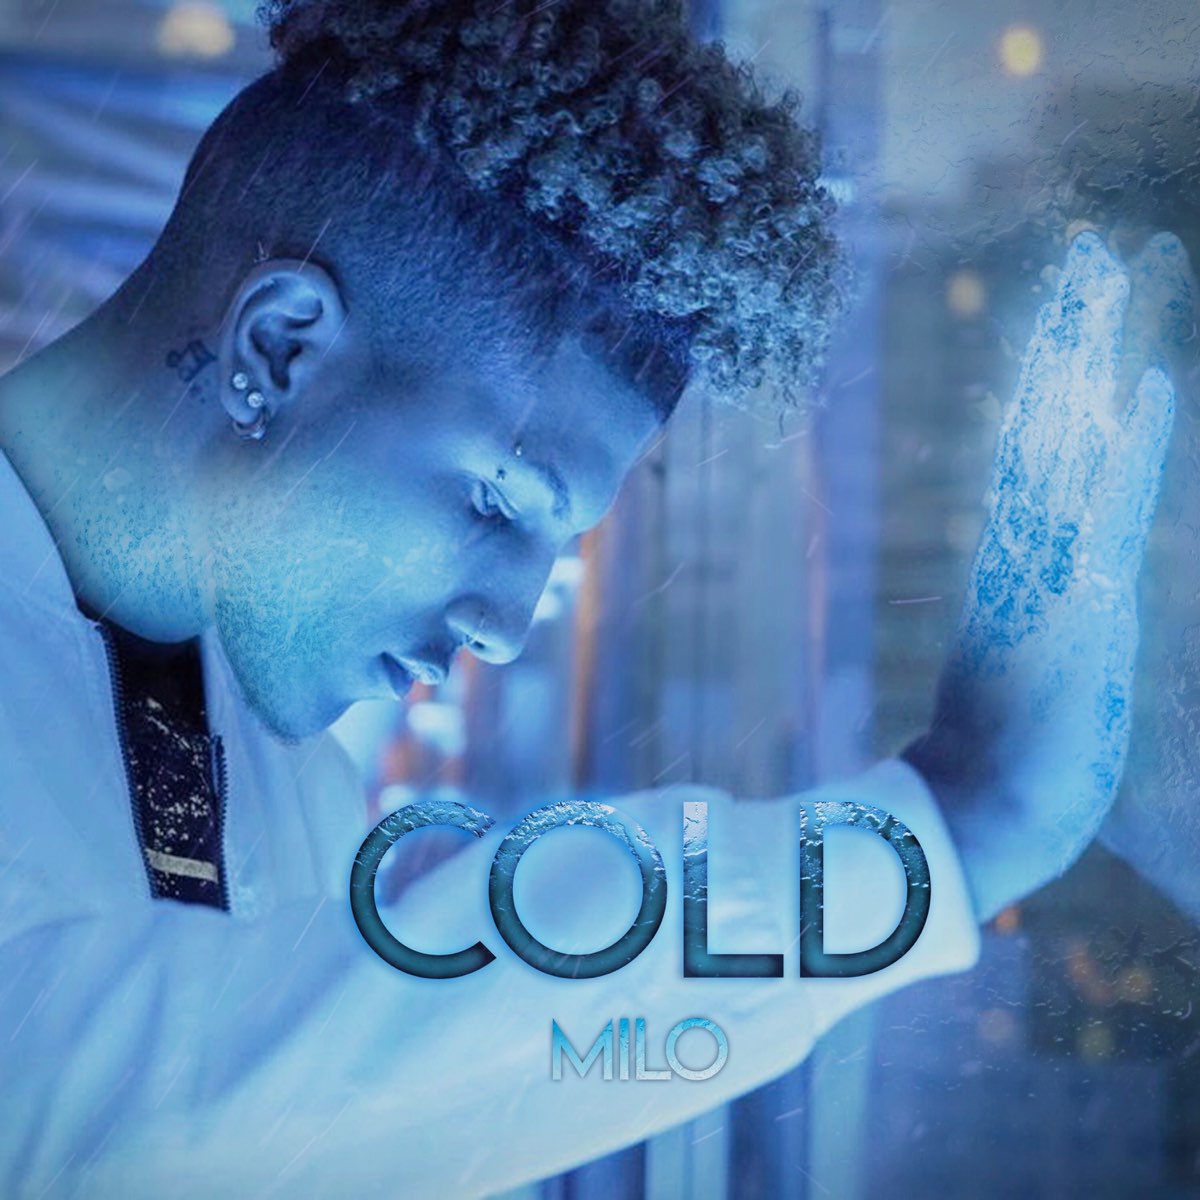 Cold обложка. Cold Music. Cold Music face. Музыка cold